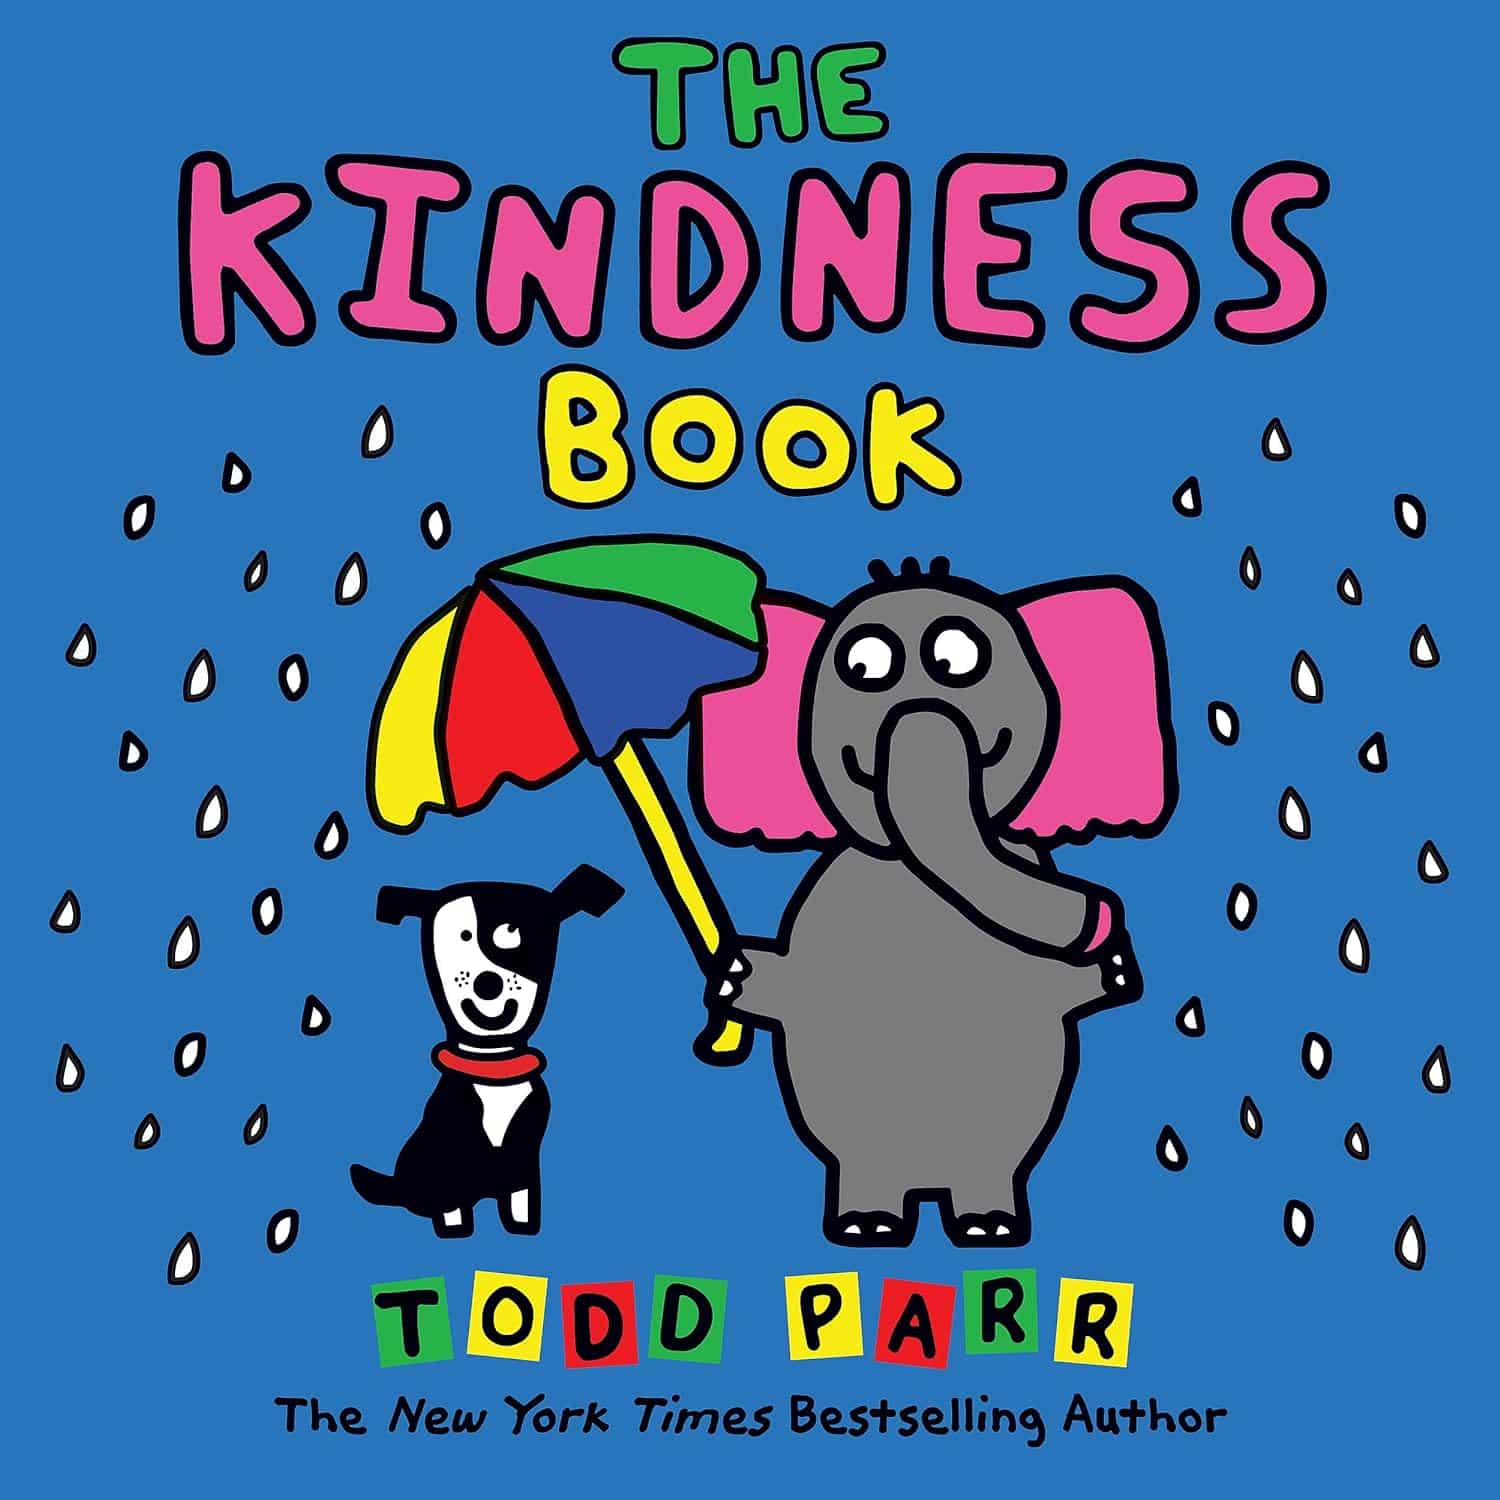 the kindness book by Todd Parr